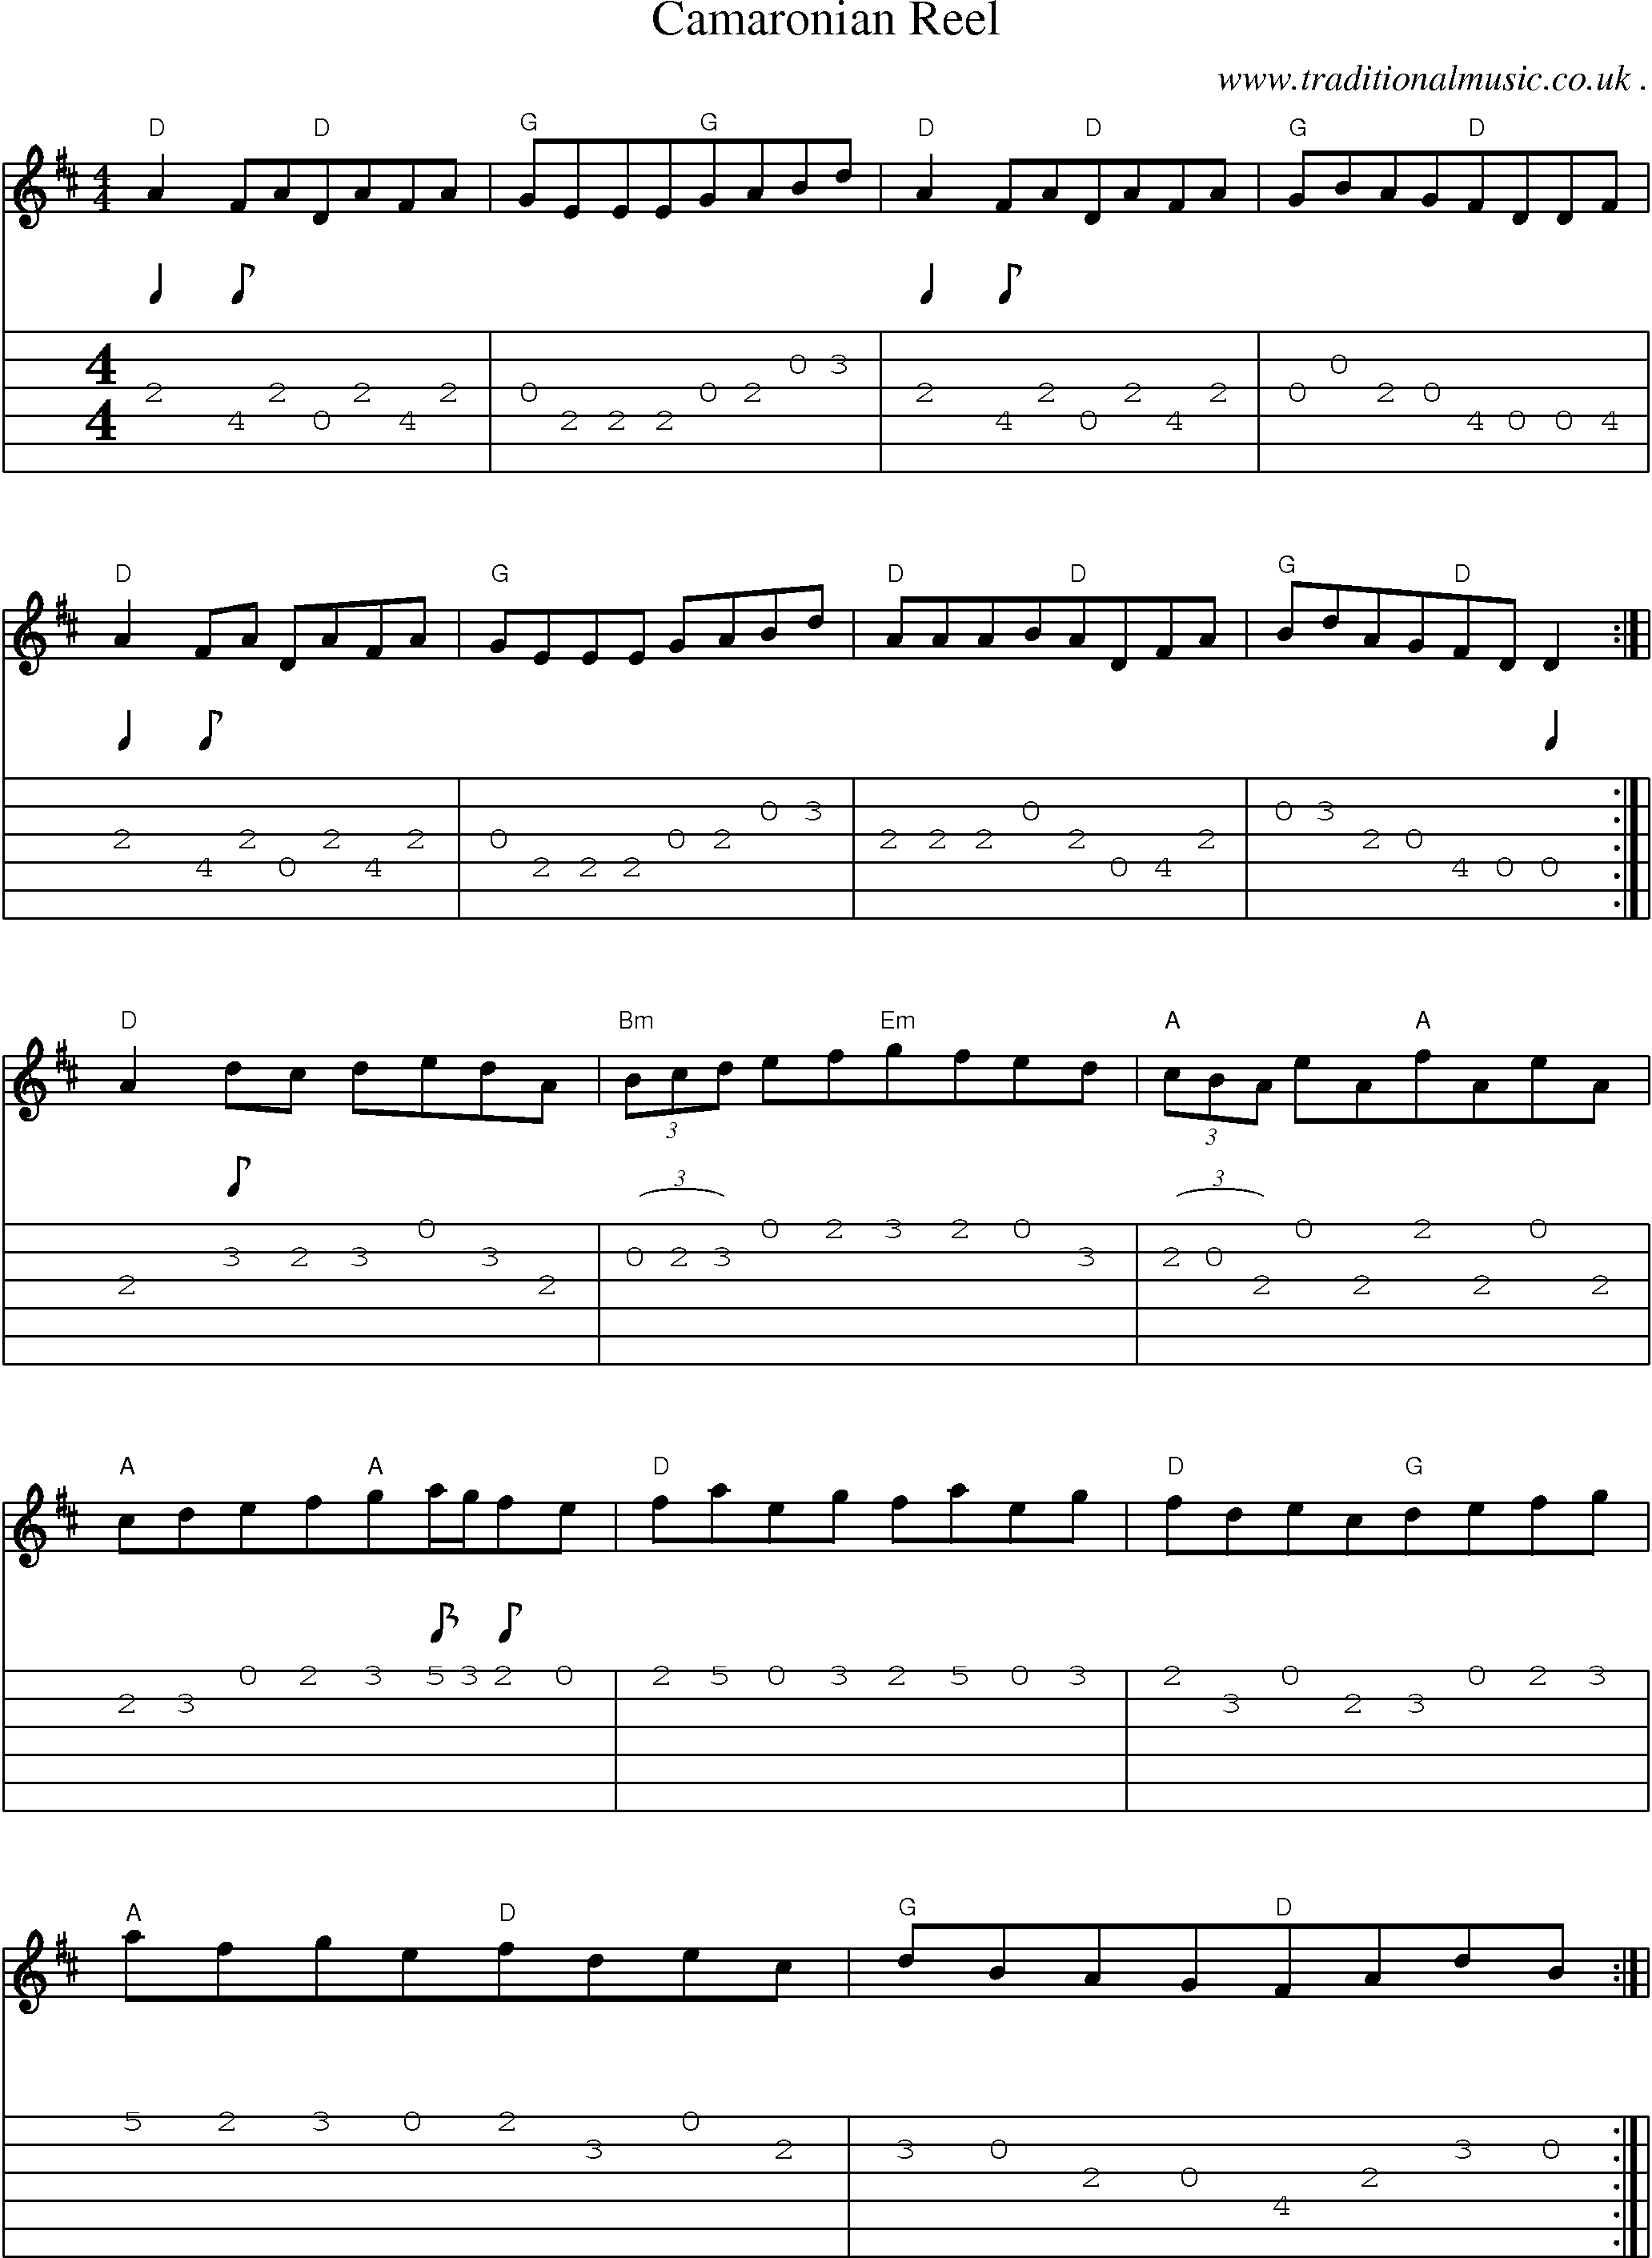 Sheet-Music and Guitar Tabs for Camaronian Reel